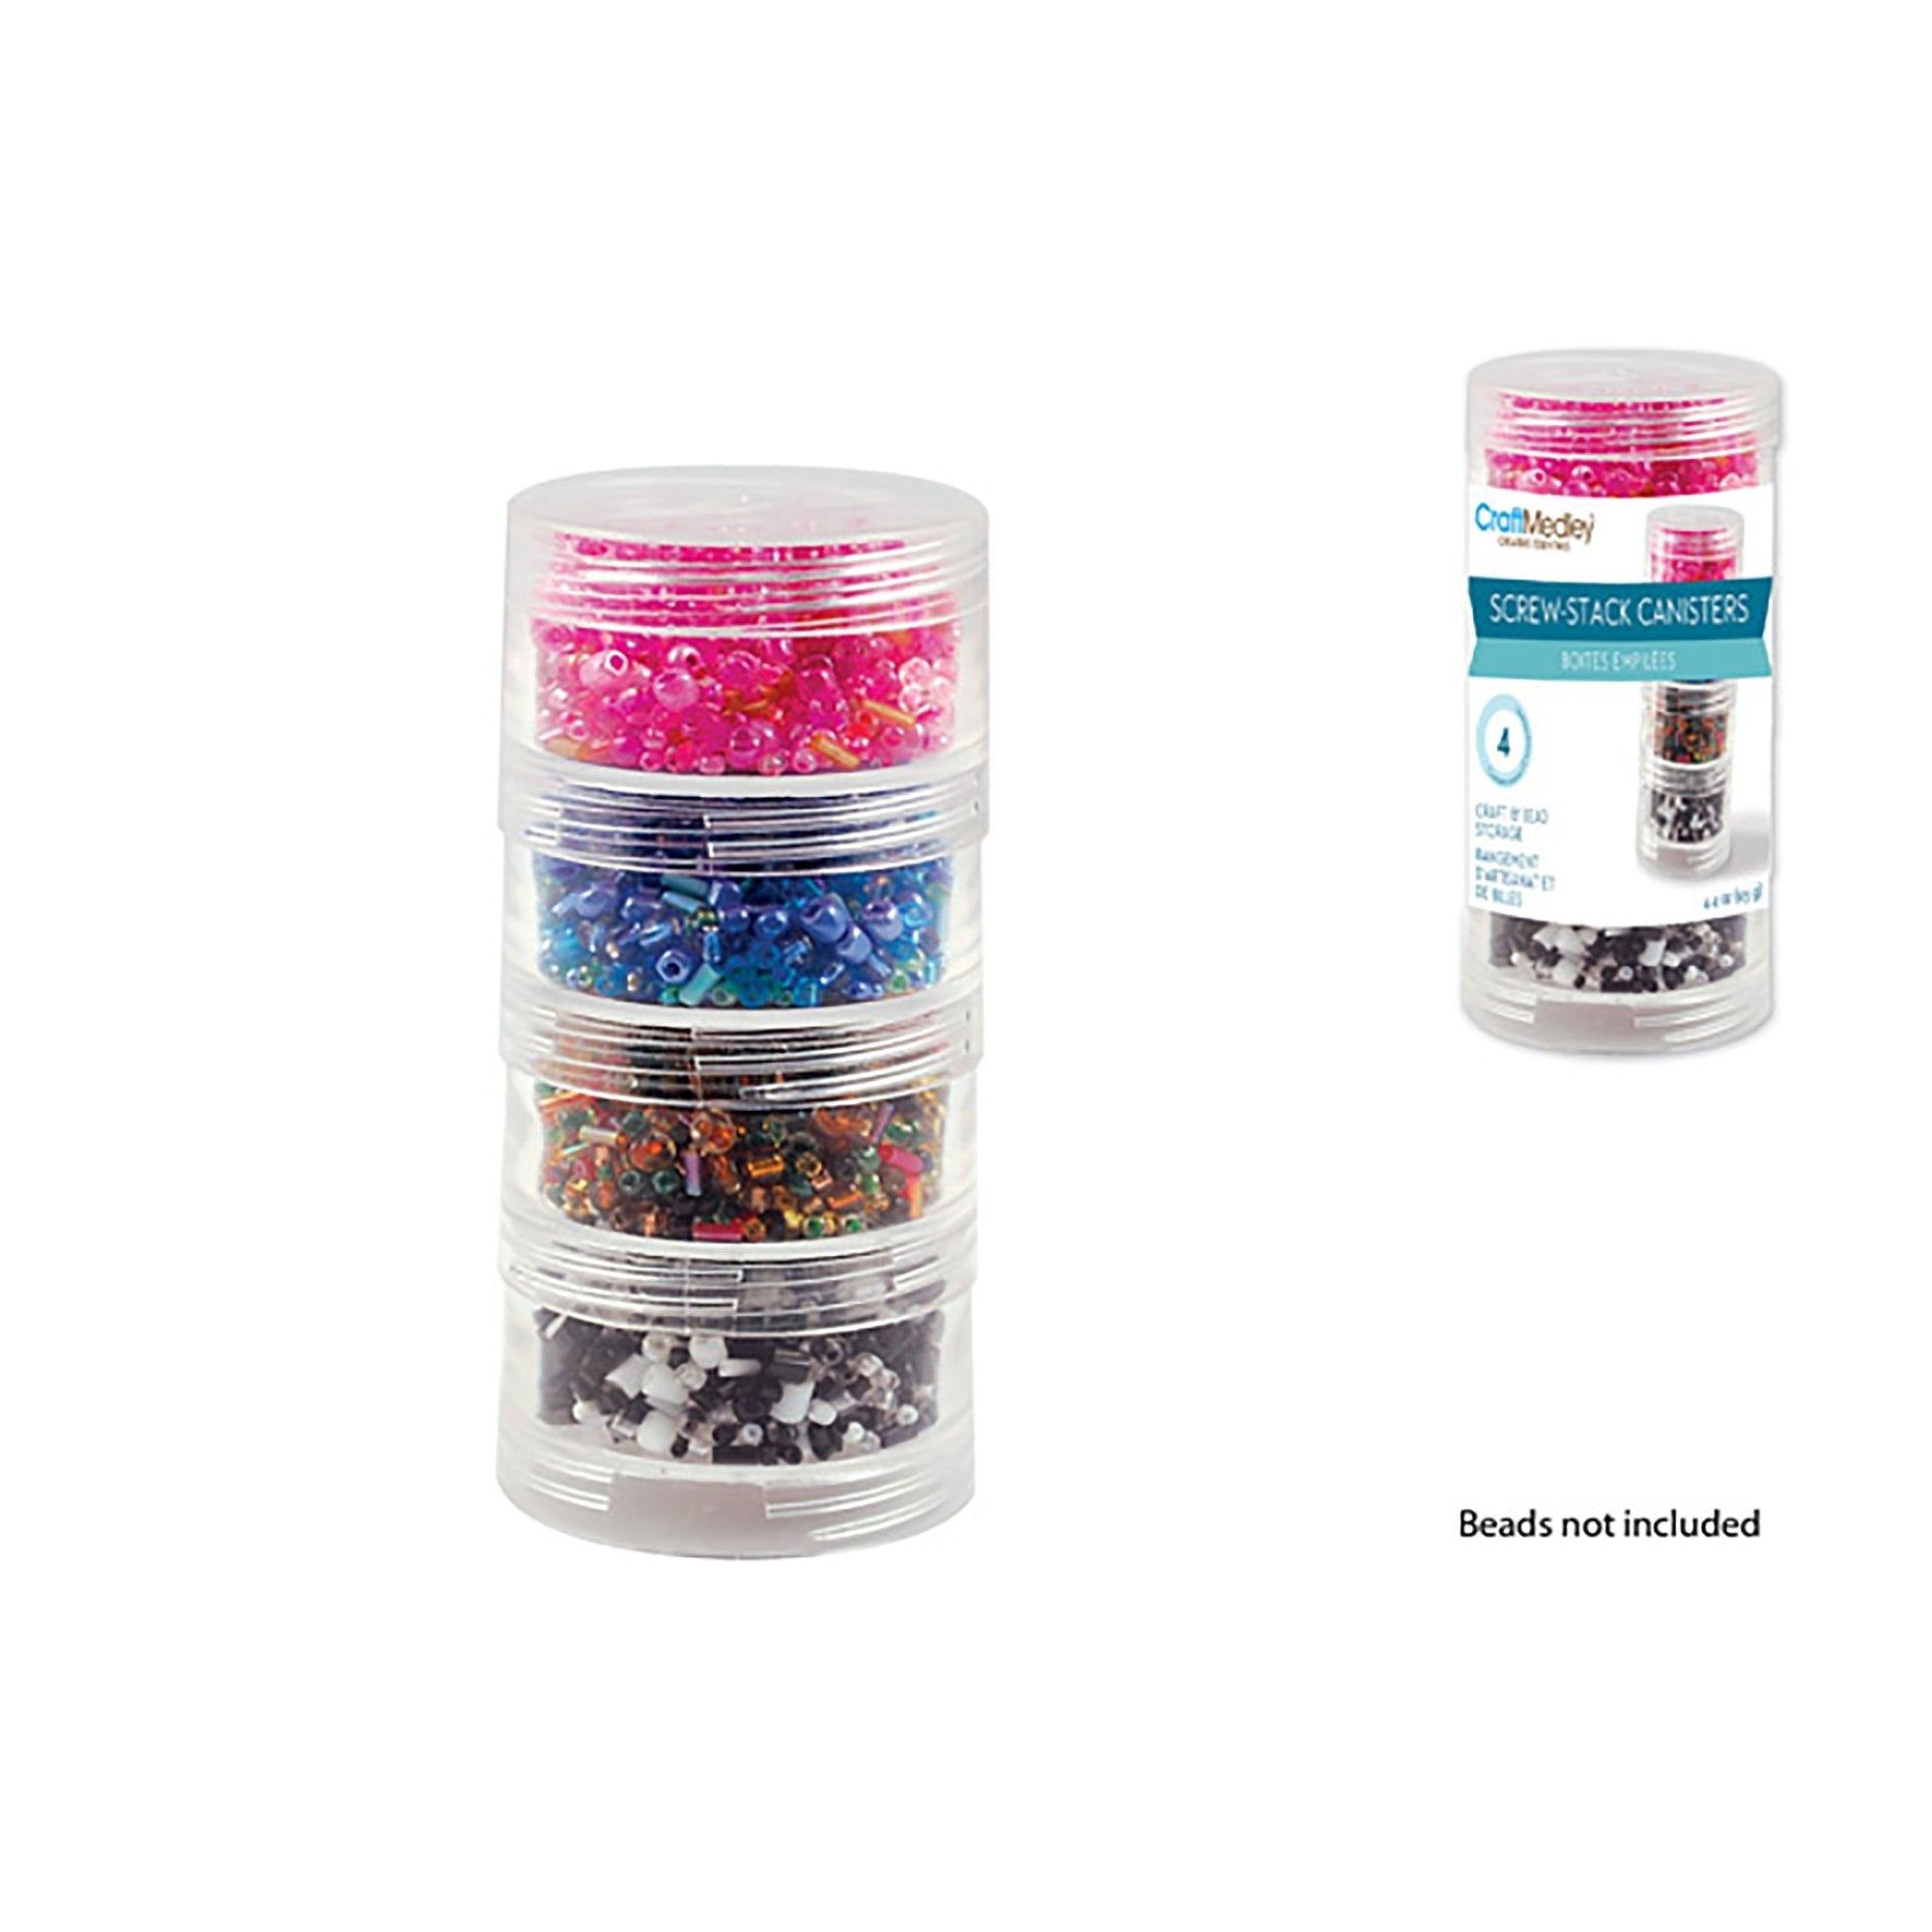 Craft / Bead Storage : 1 7 / 8"X1" Screw-Stack Canisters X4 - Dollar Max Dépôt